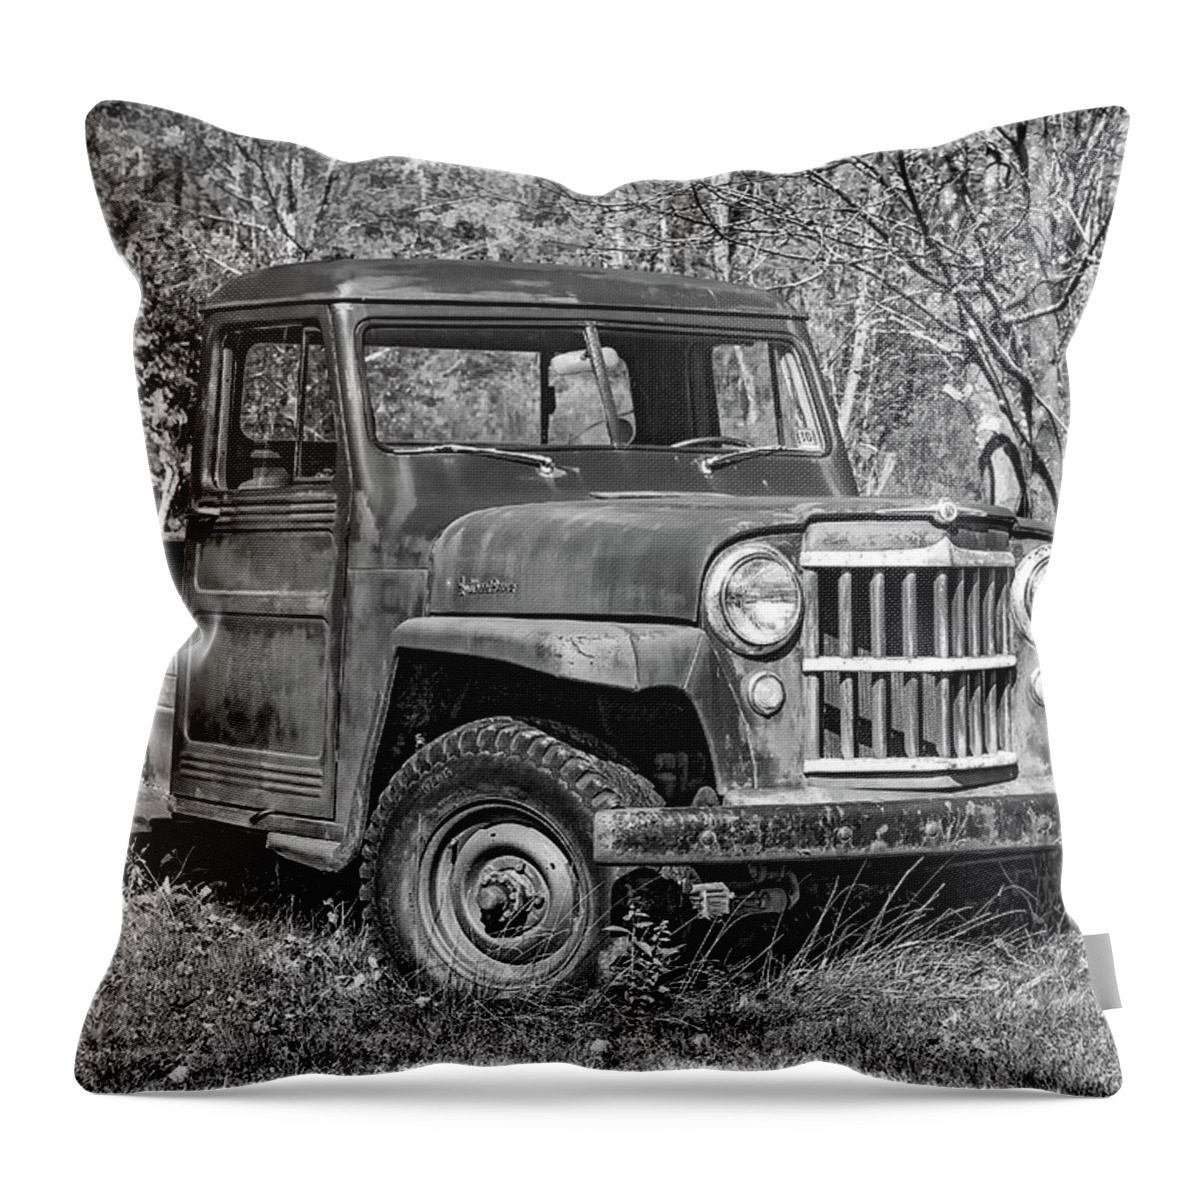 Vehicle Throw Pillow featuring the photograph Willys Jeep Pickup Truck 2 bw by Steve Harrington